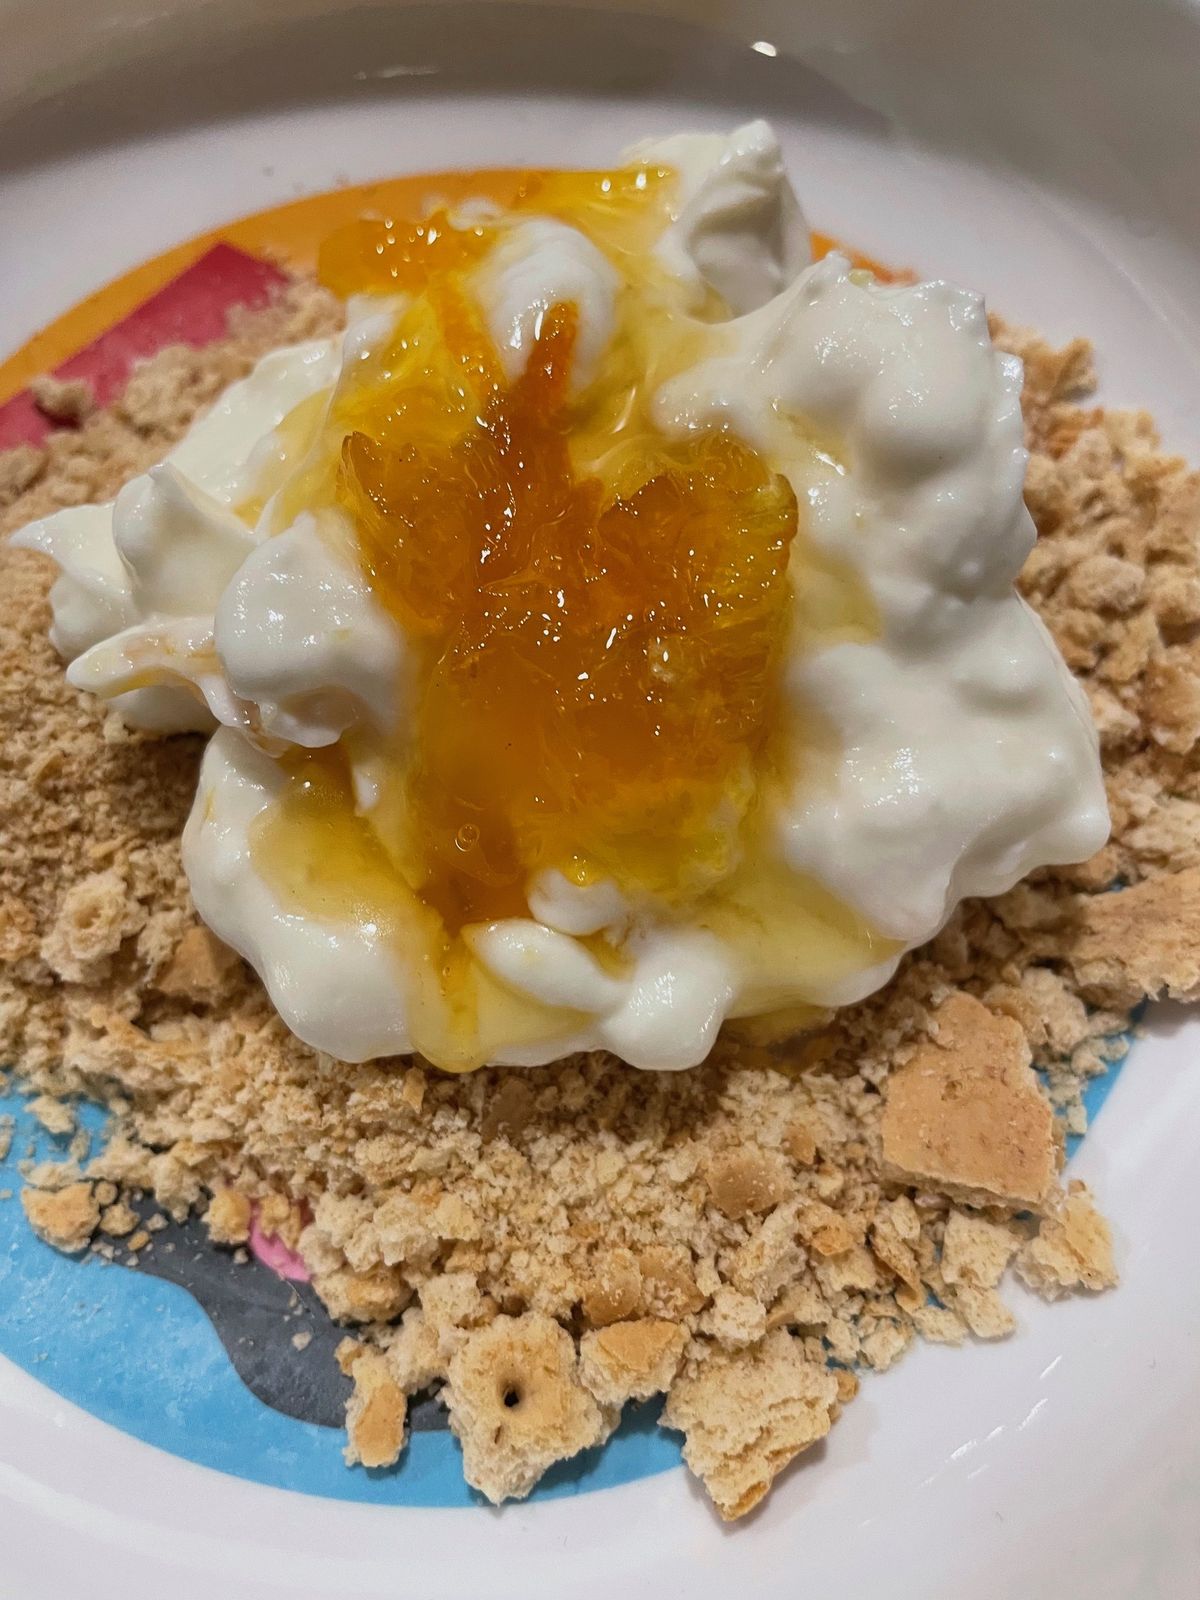 Inspired by “The Golden Girls,” this cheesecake hack is made with yogurt, goat cheese, orange marmalade and graham crackers. (Leslie Kelly)